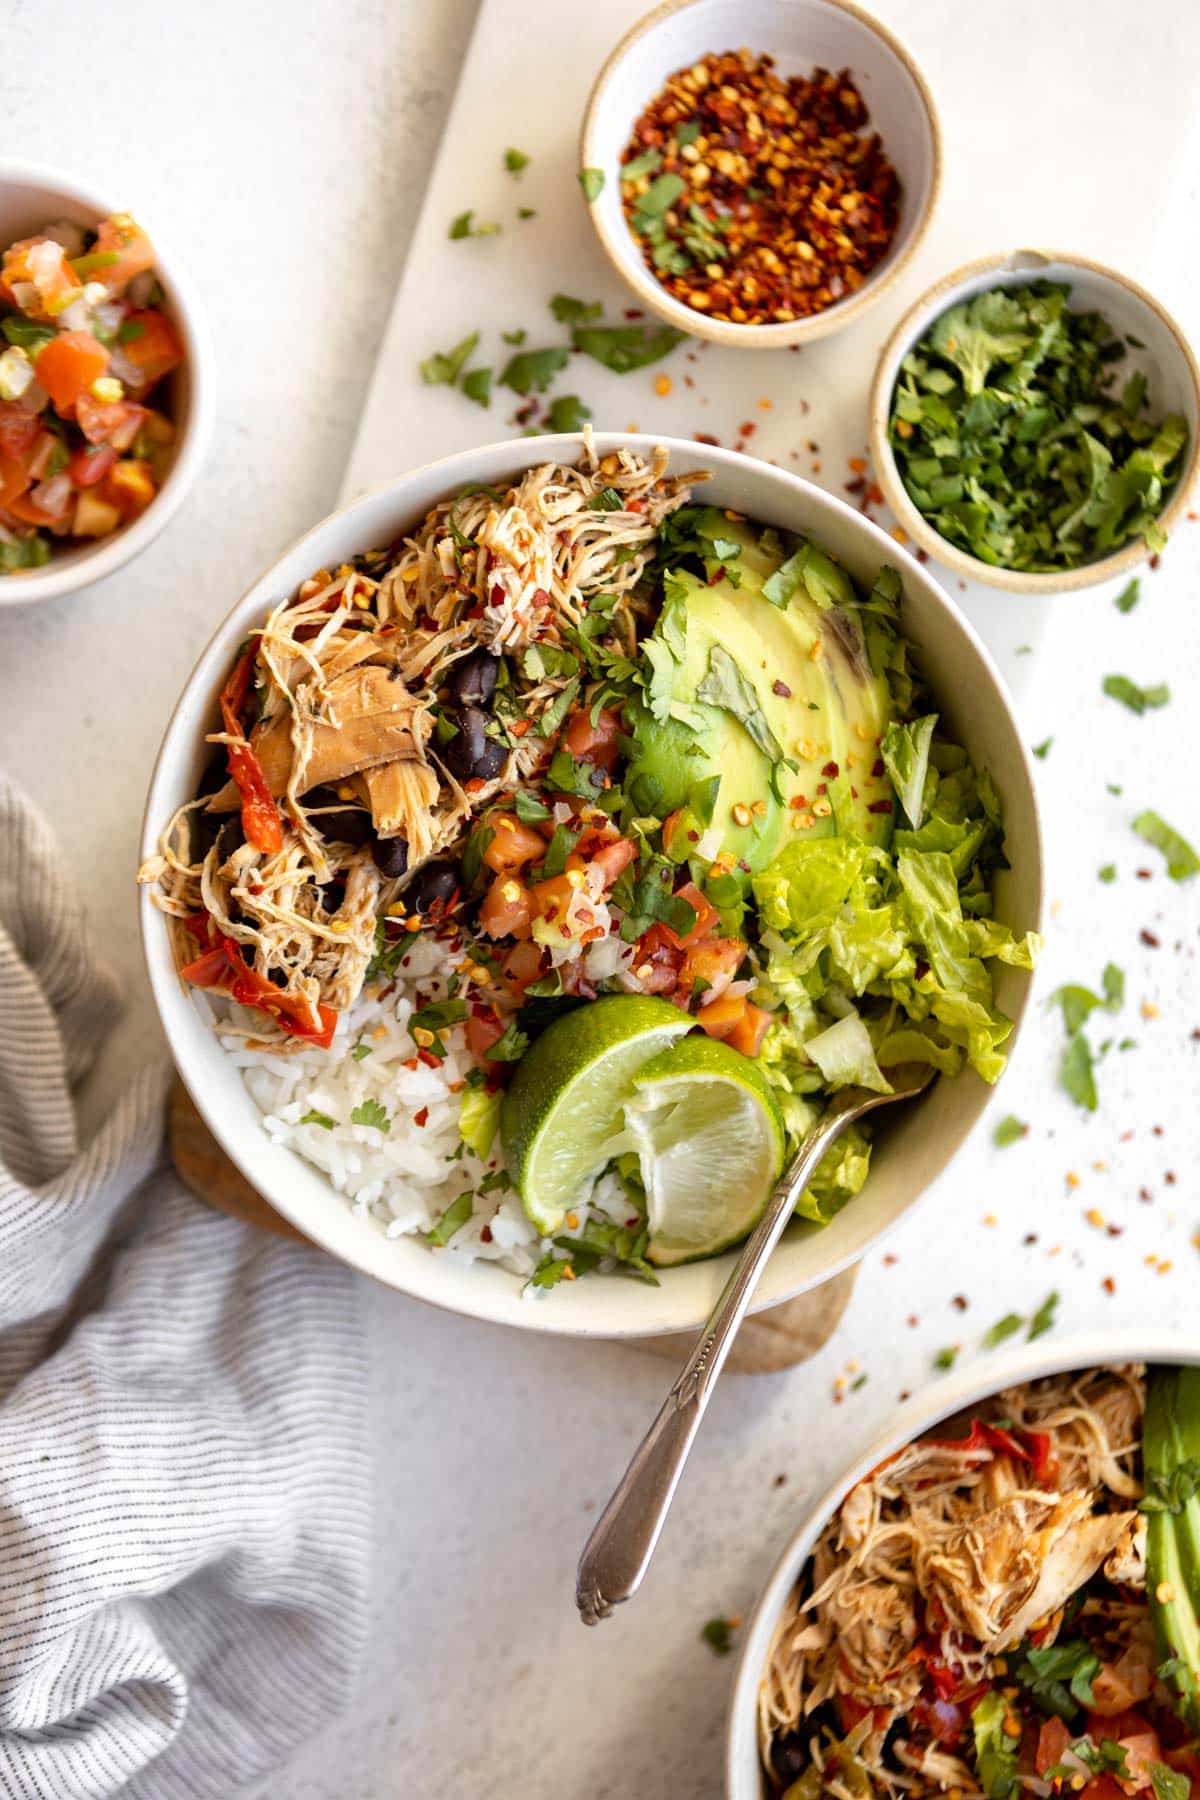 Make taco night easy night with these Crockpot Chicken Taco Bowls! Made naturally gluten free with homemade low sodium taco seasoning and layered with fresh vegetables, this low calorie dinner is one everyone will love especially the cook! 